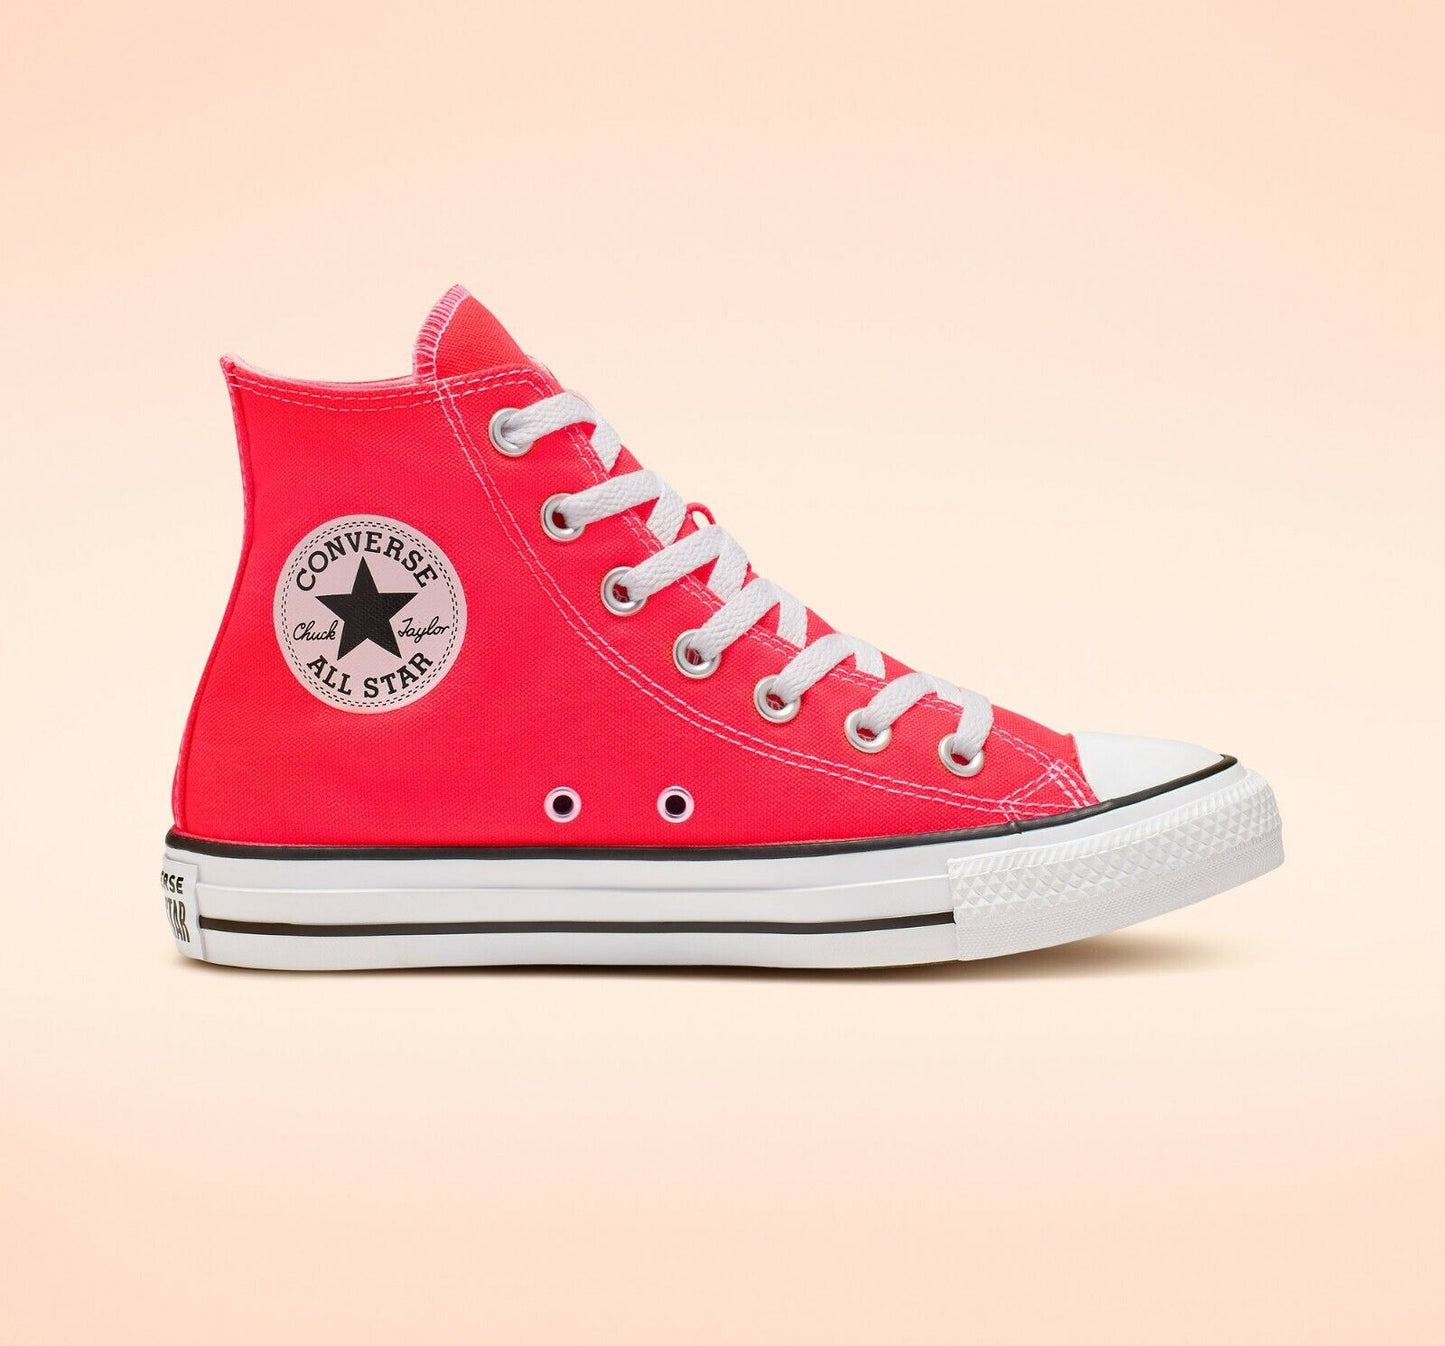 Converse Chuck Taylor All Star Hi Casual Shoes, 166264F Multi Sizes Brgt Crimson